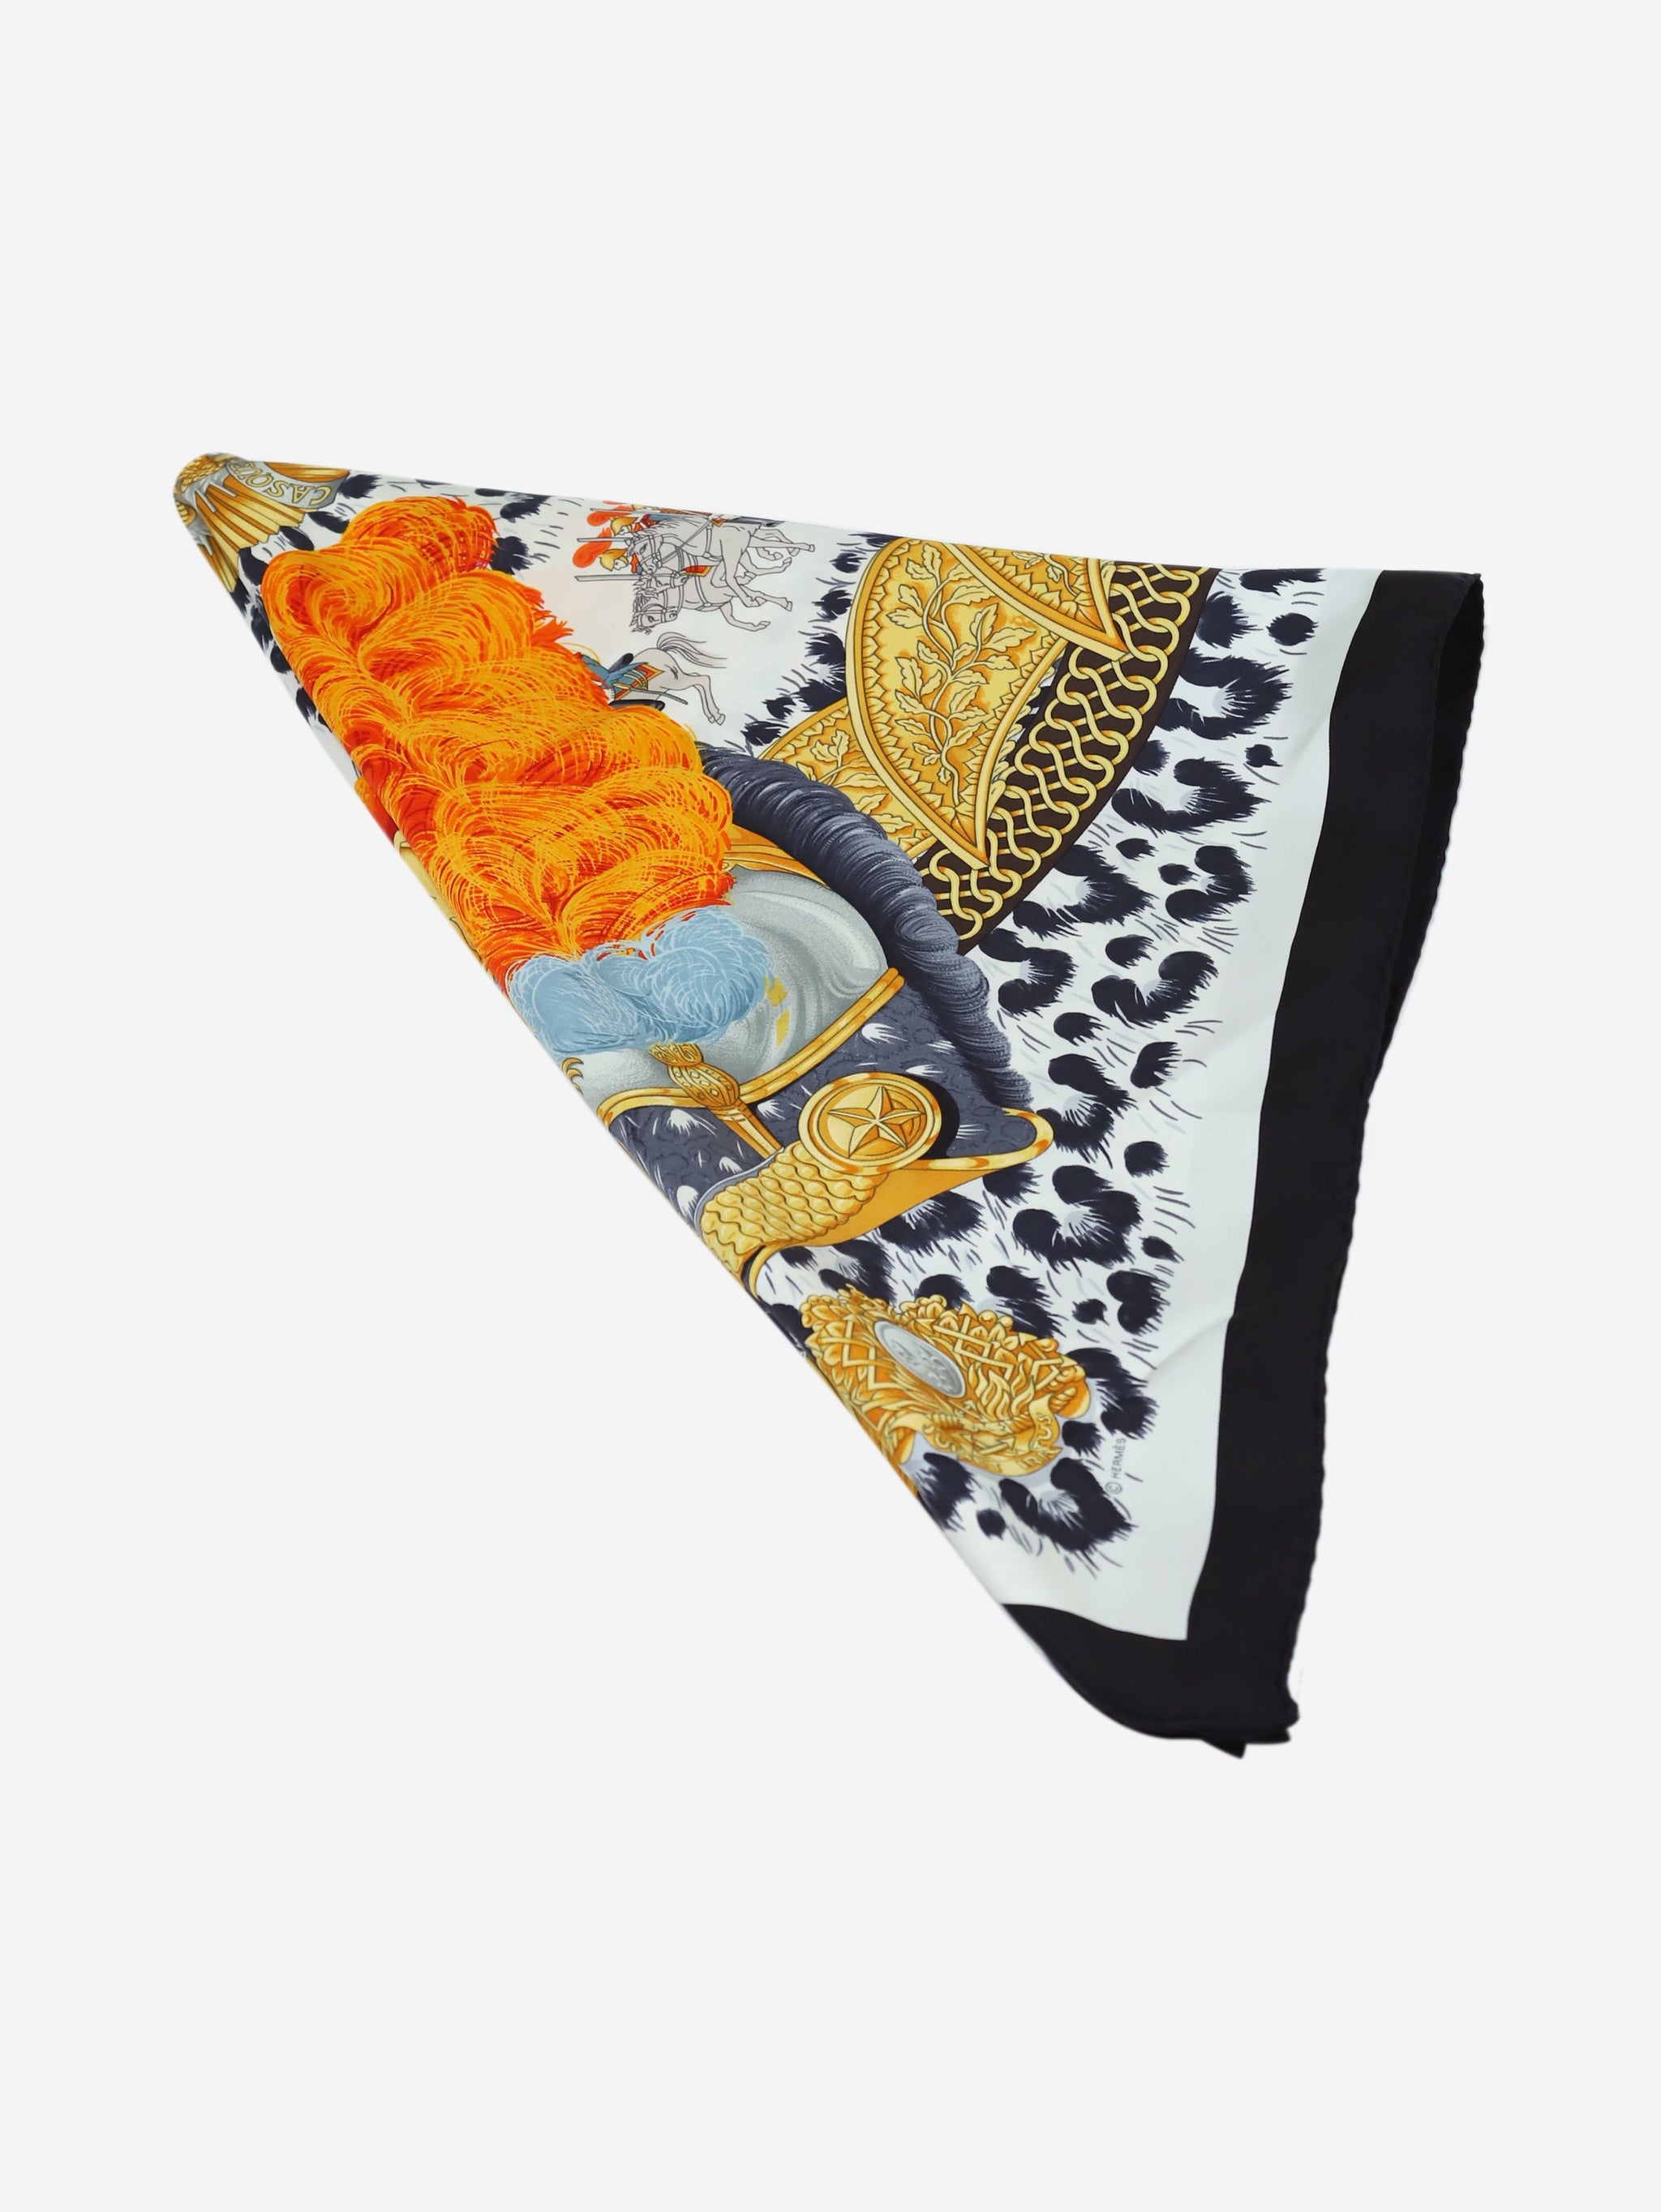 Hermes pre-owned animal print silk scarf | Sign of the Times